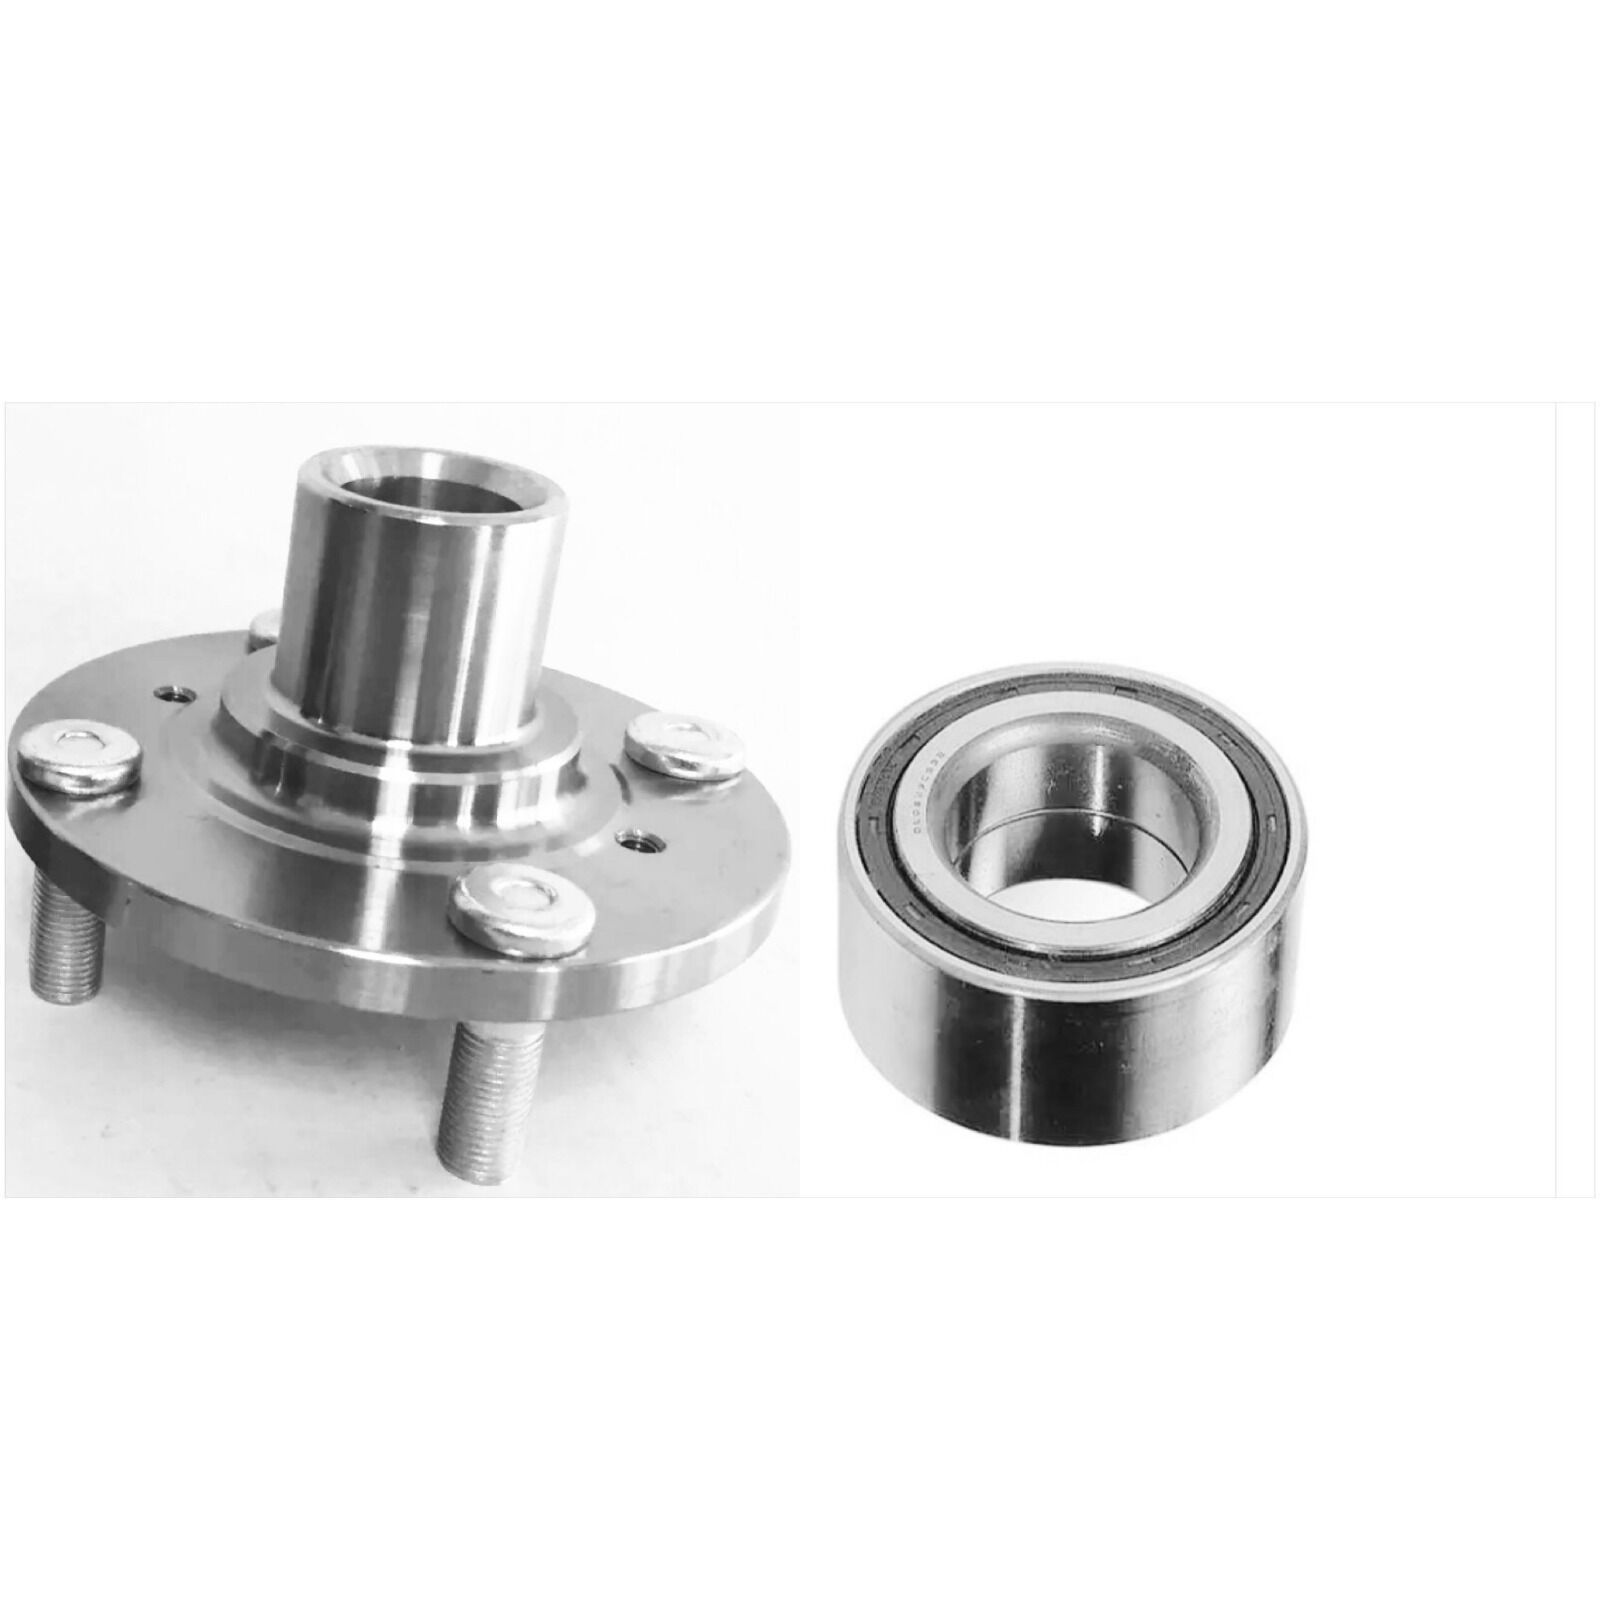 FRONT WHEEL HUB & BEARING FOR SUZUKI AERIO 2WD (2002-2007) LEFT OR RIGHT SIDE